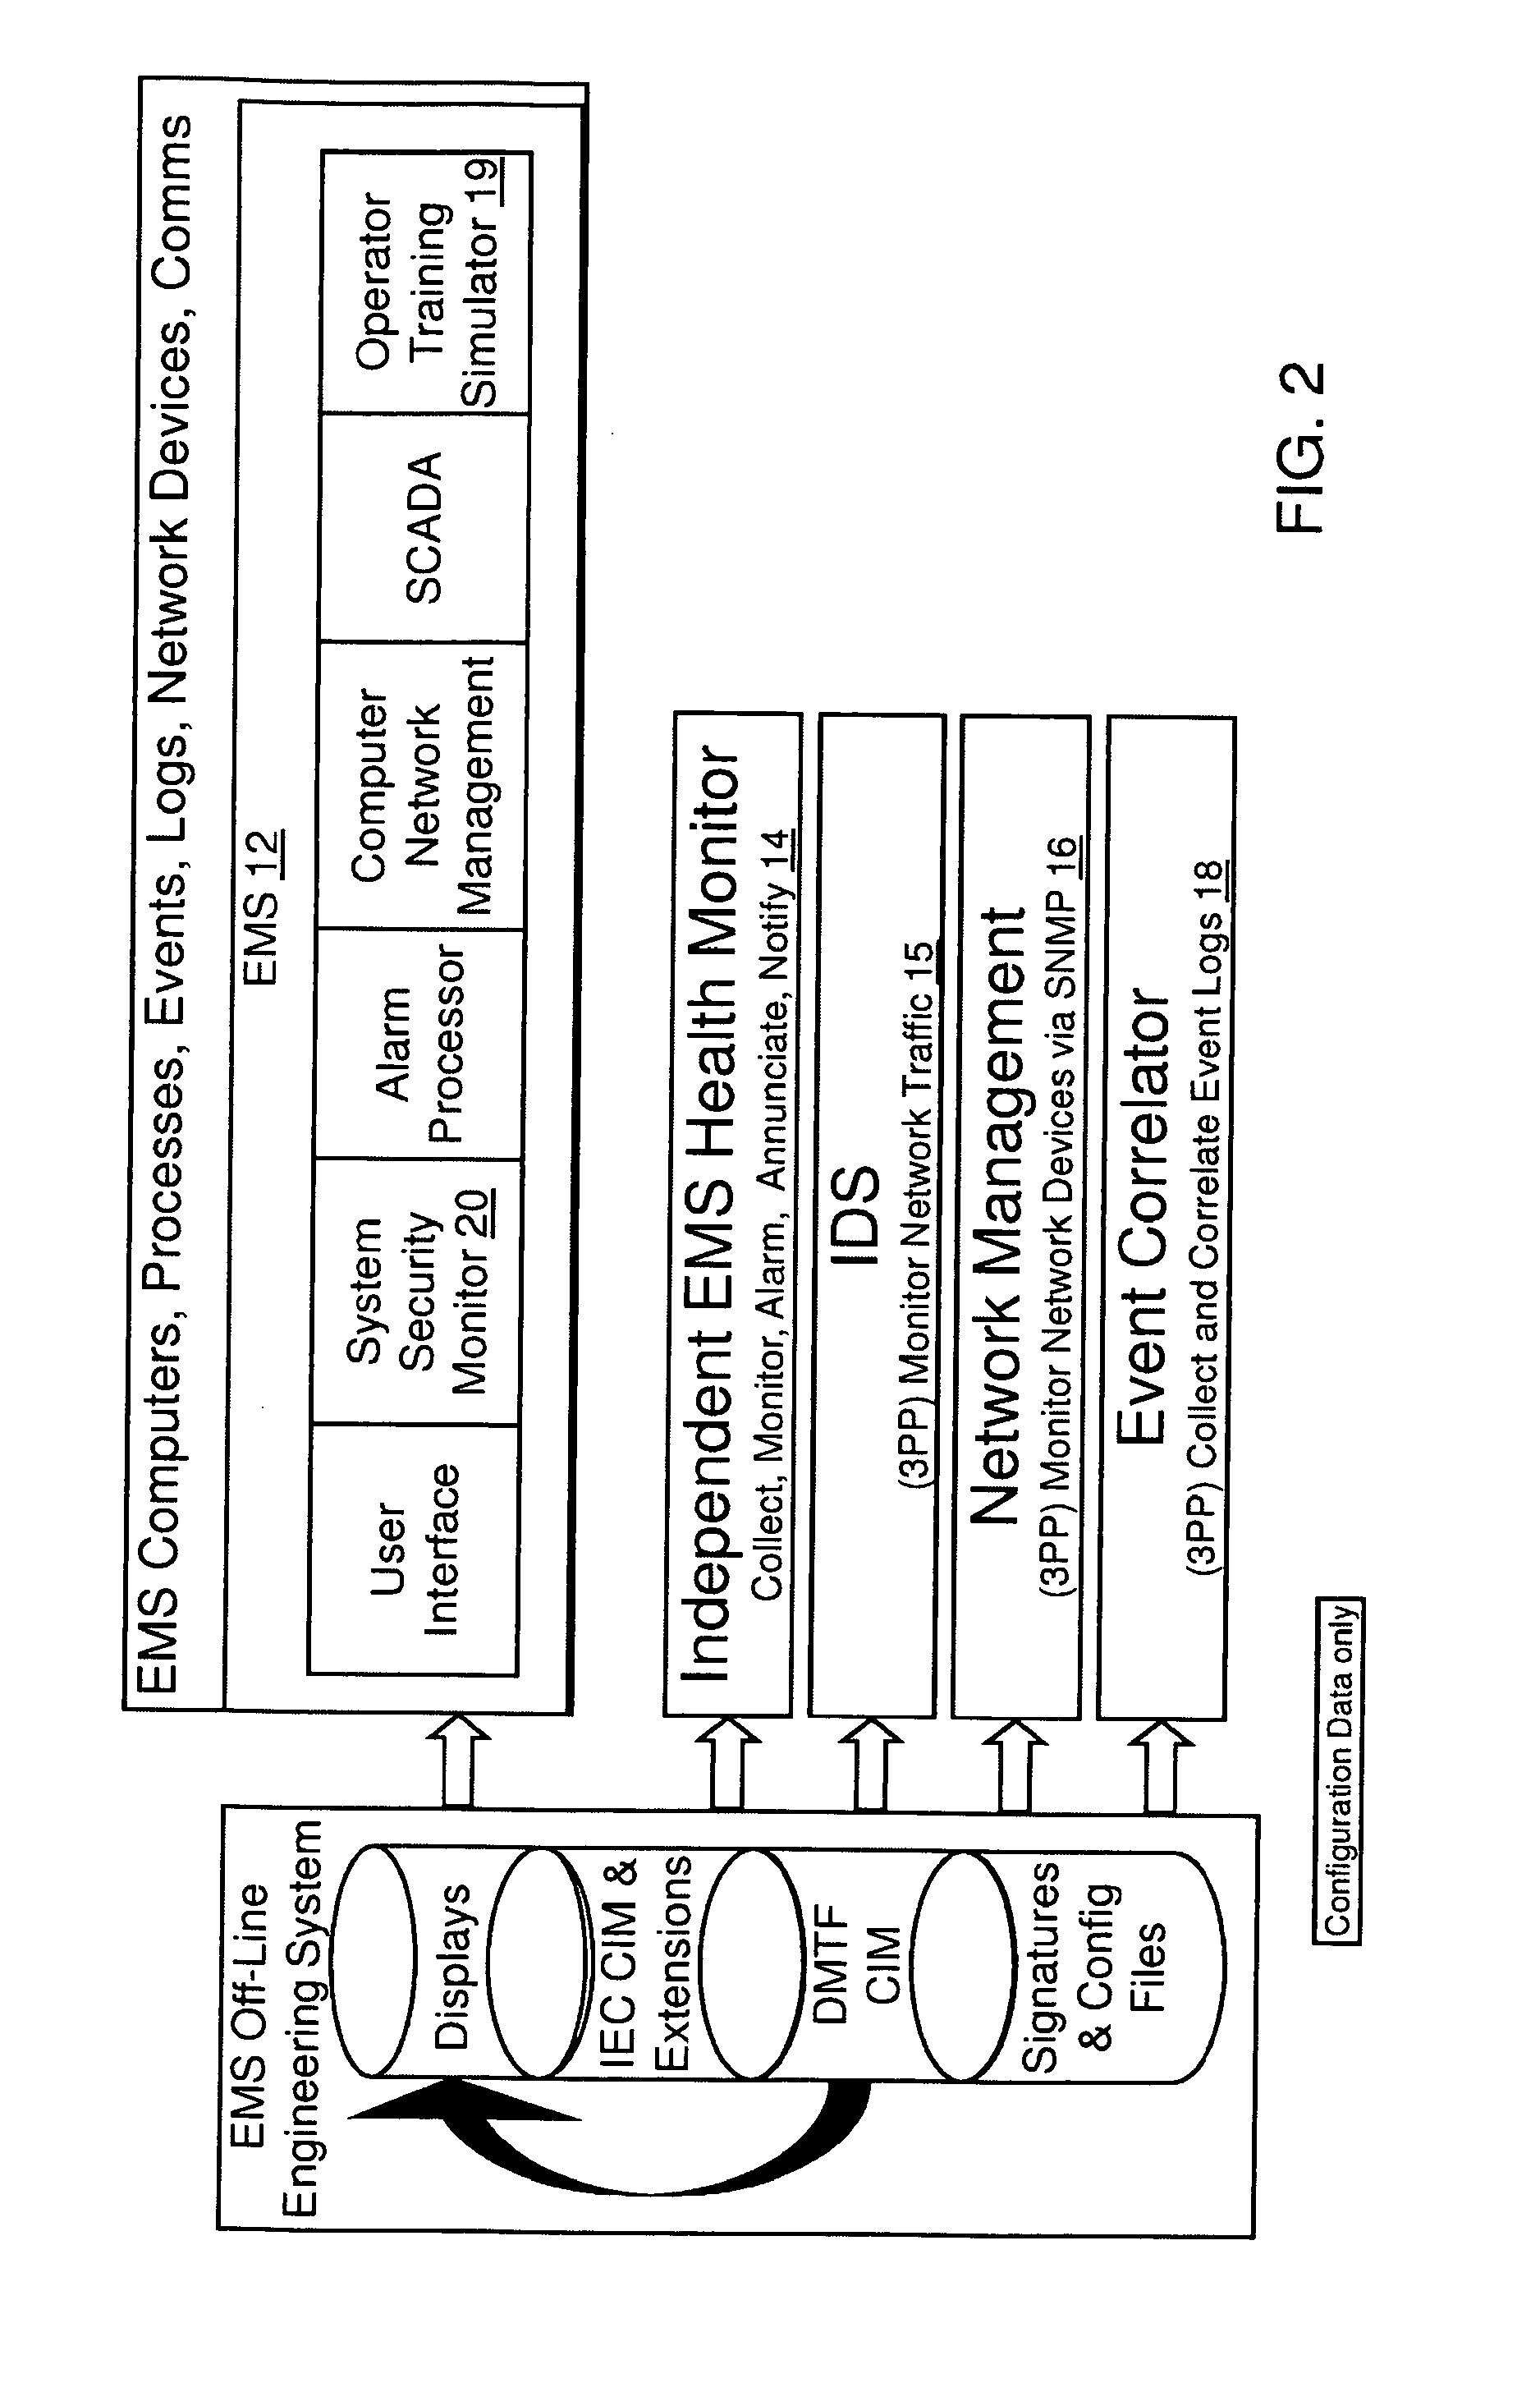 Method and system for cyber security management of industrial control systems